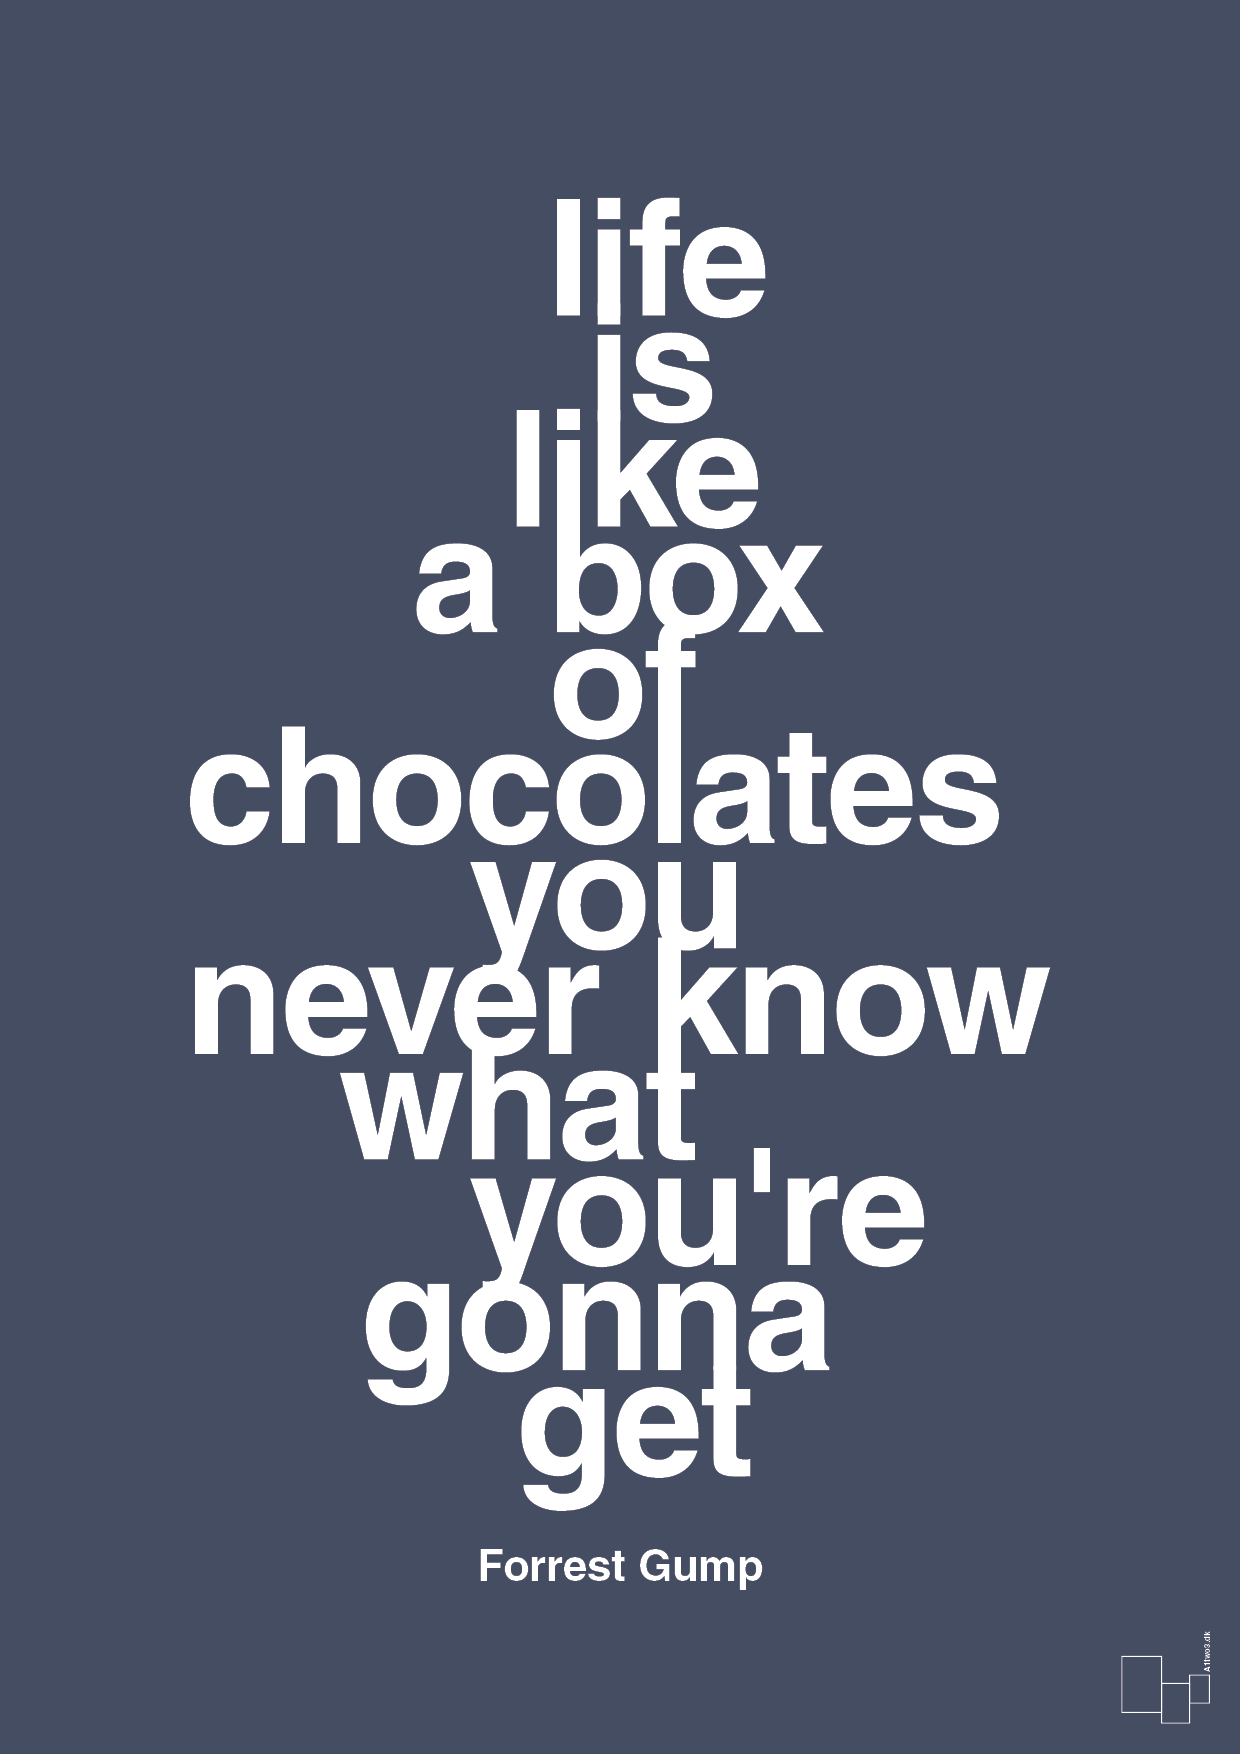 life is like a box of chocolates you never know what you're gonna get - Plakat med Citater i Petrol